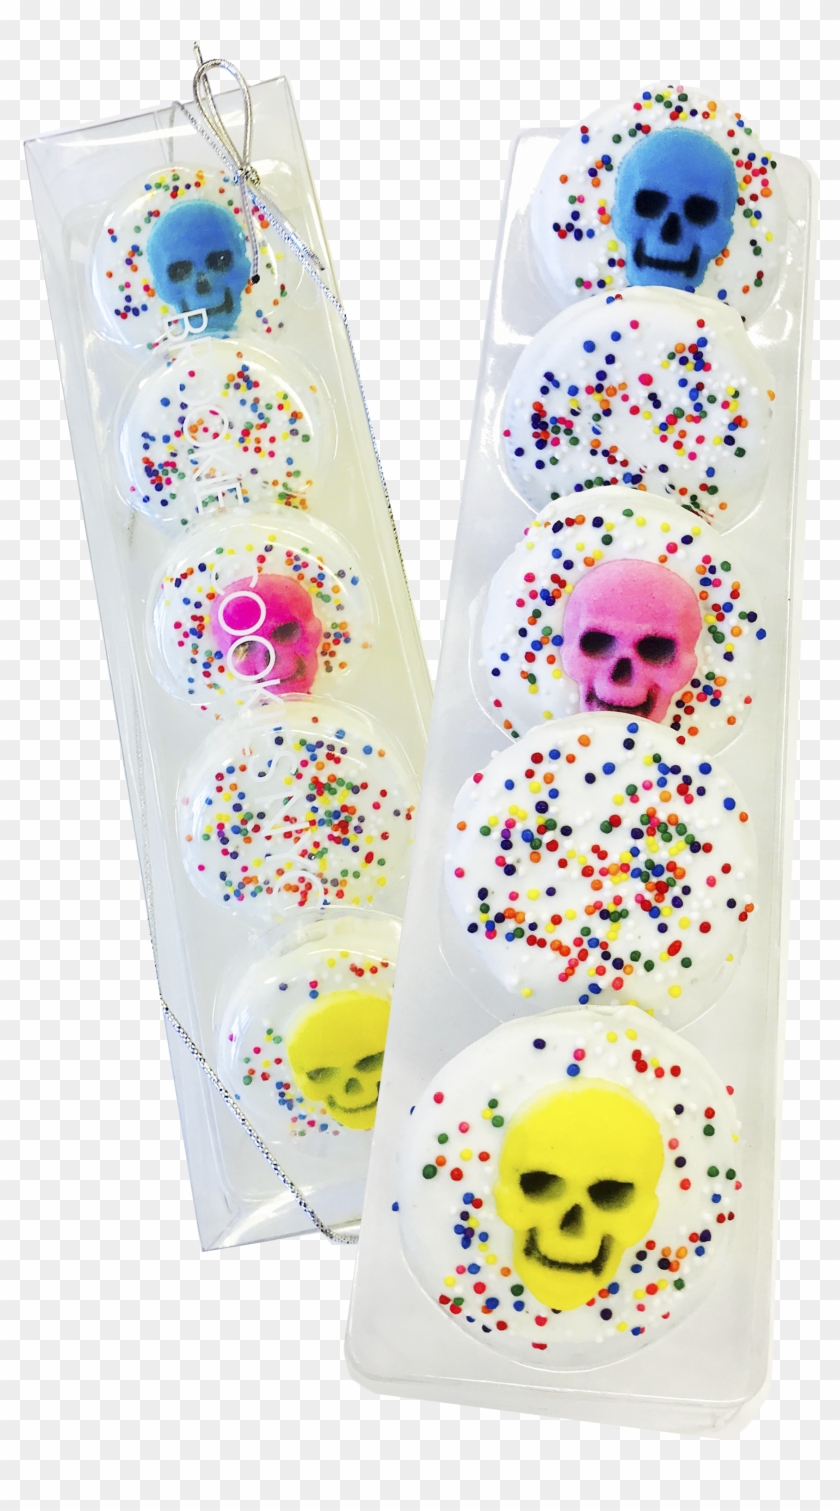 White Chocolate Covered Oreos With Candy Skull Topper - Smiley Clipart #3645950